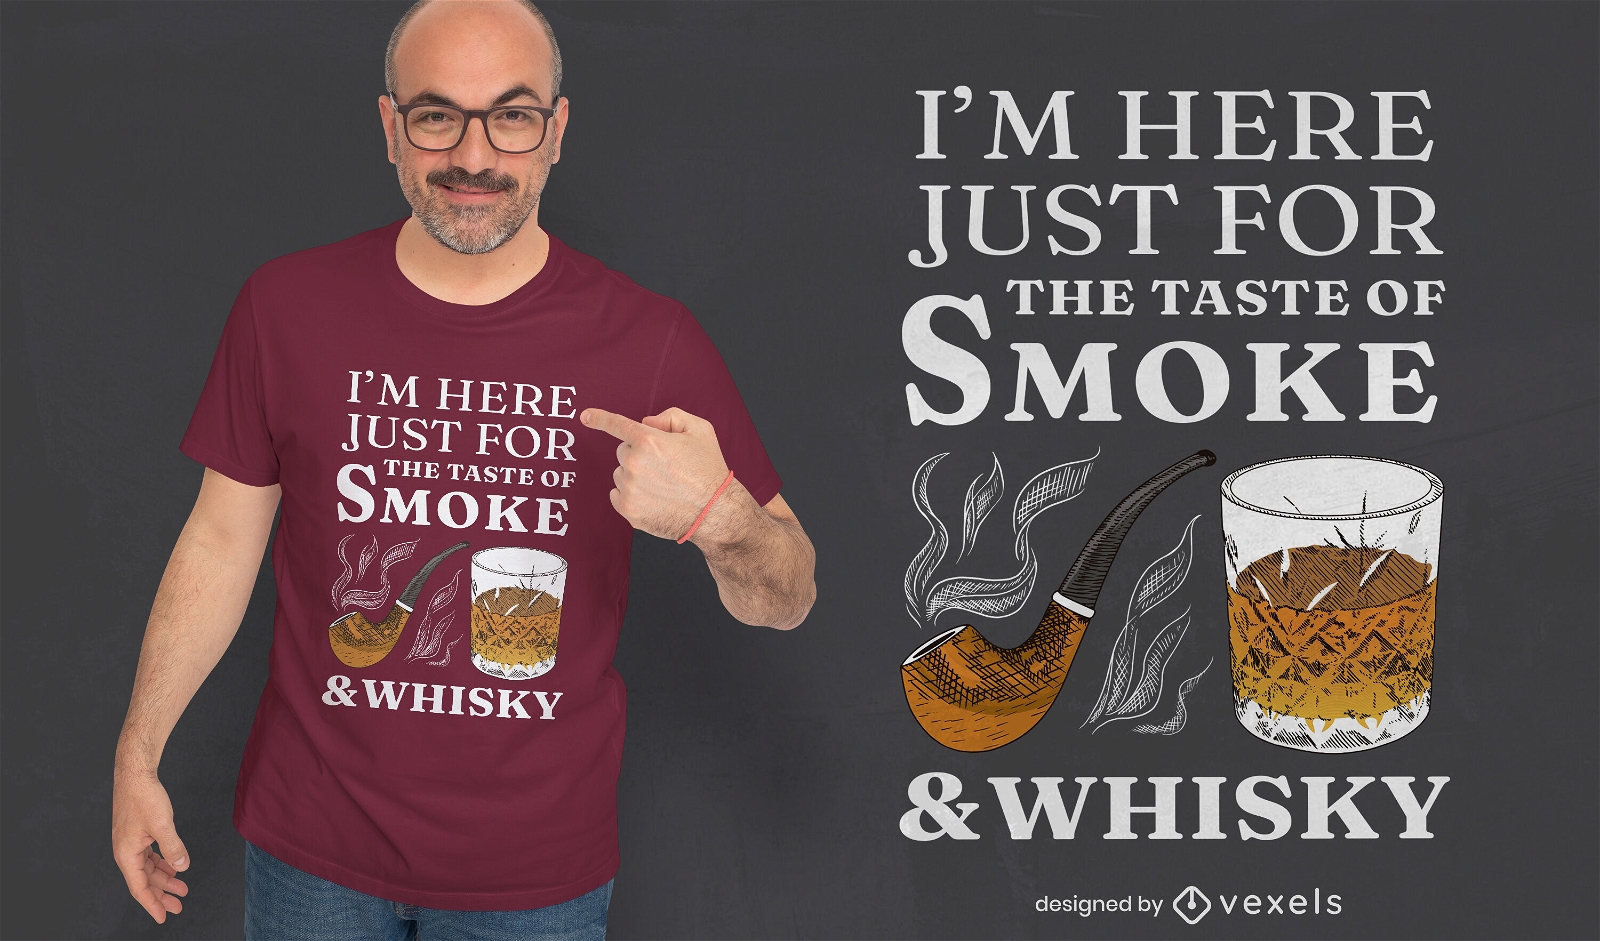 Smoke and whisky quote t-shirt design